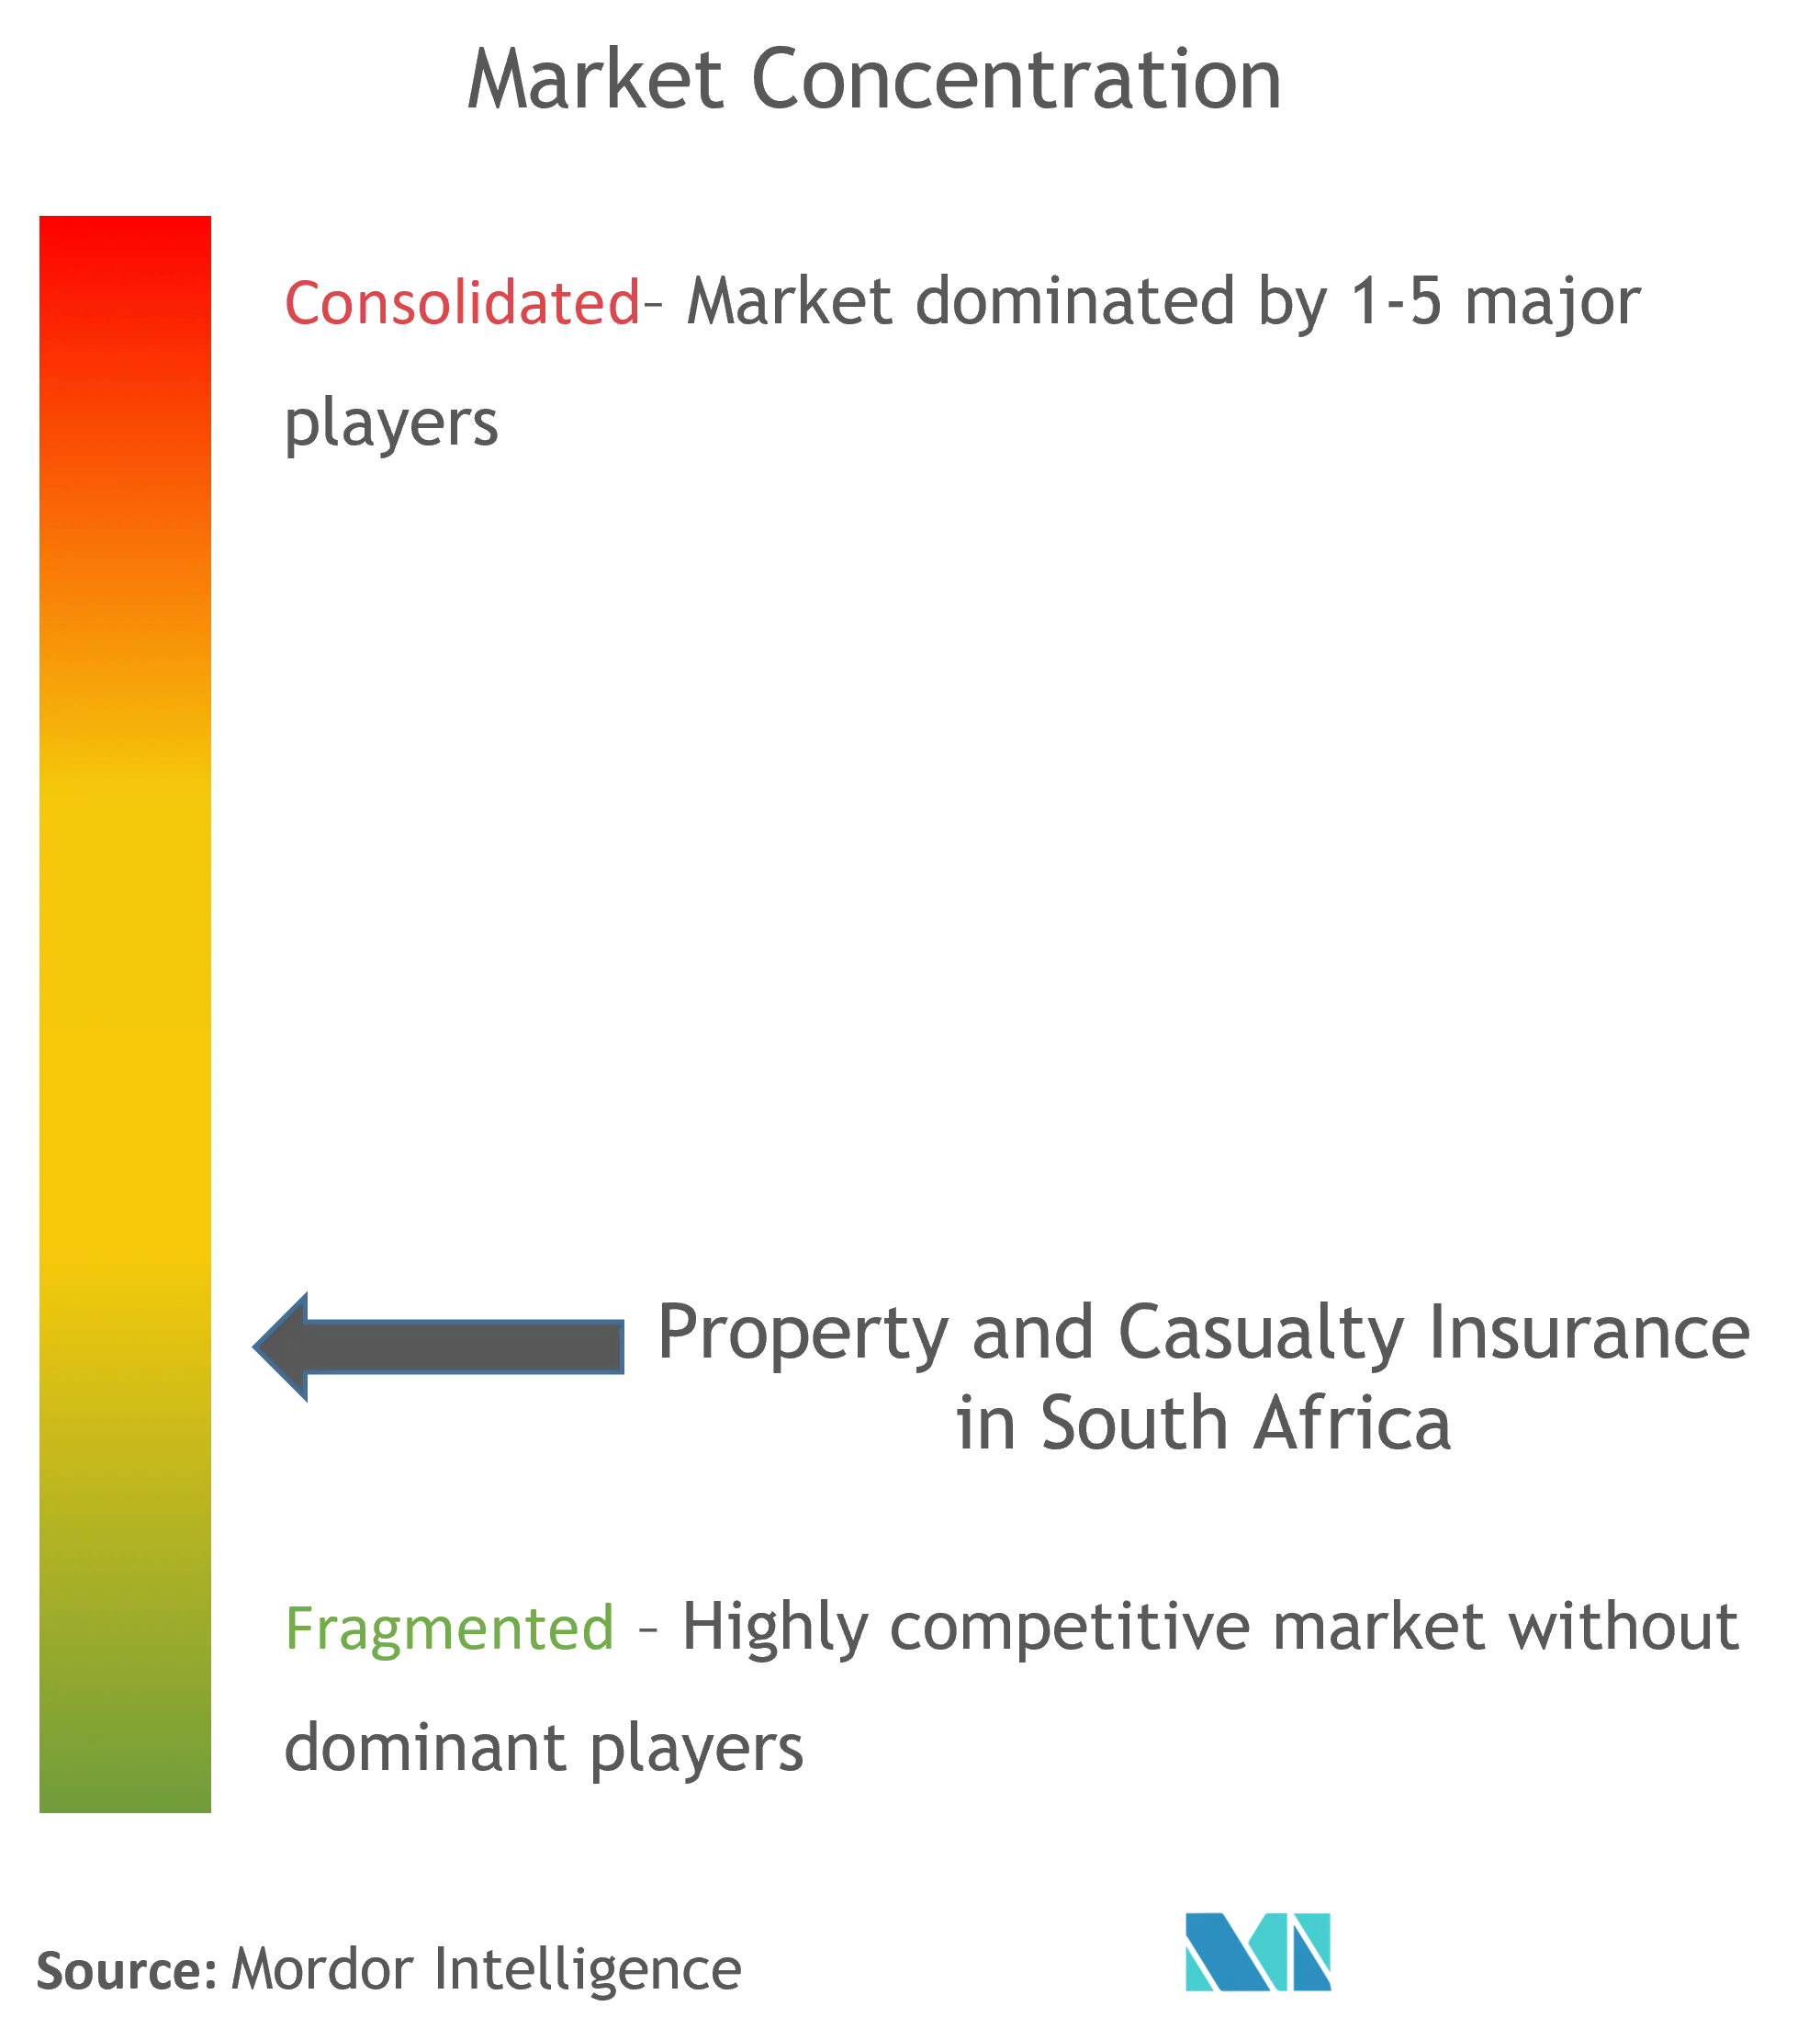 South Africa Property & Casualty Insurance Market Concentration